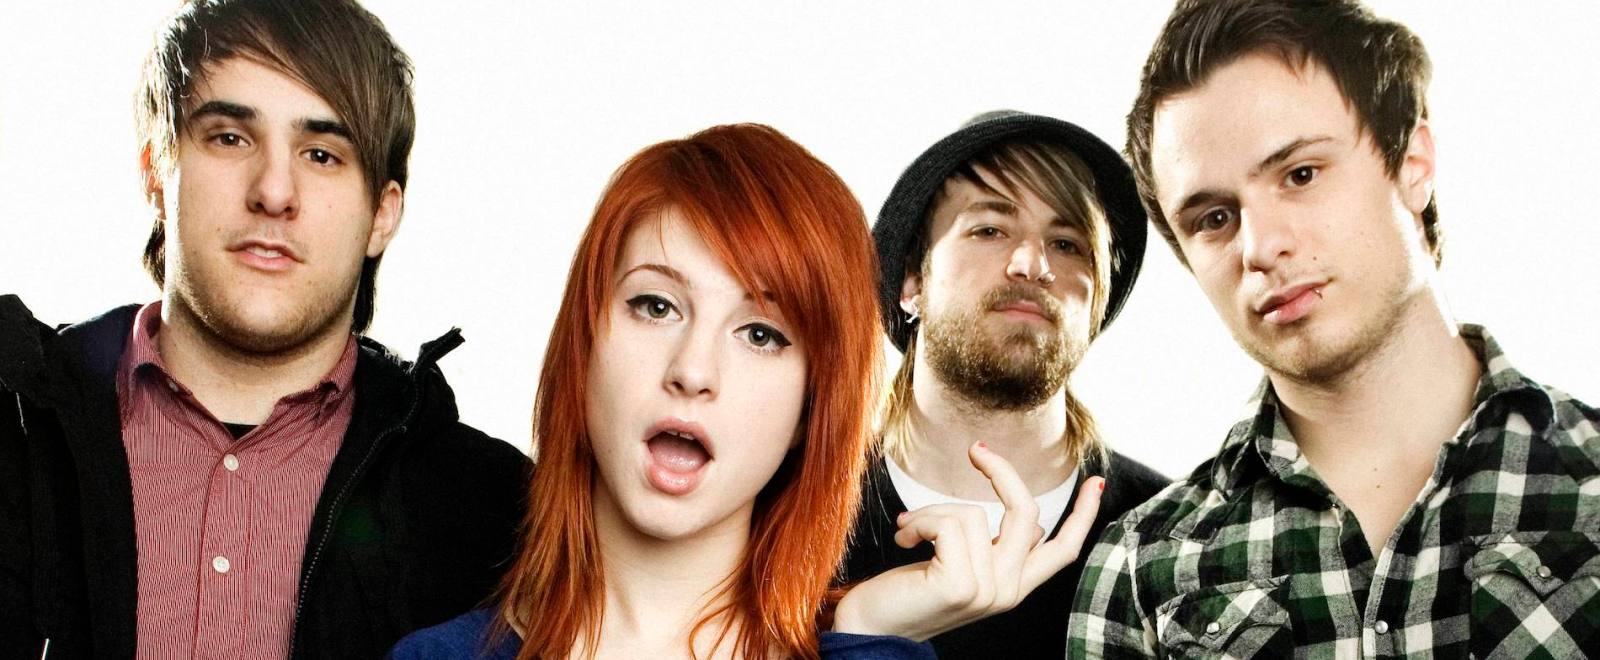 Paramore's 'Twilight' Songs Are Finally Streaming 13 Years Later